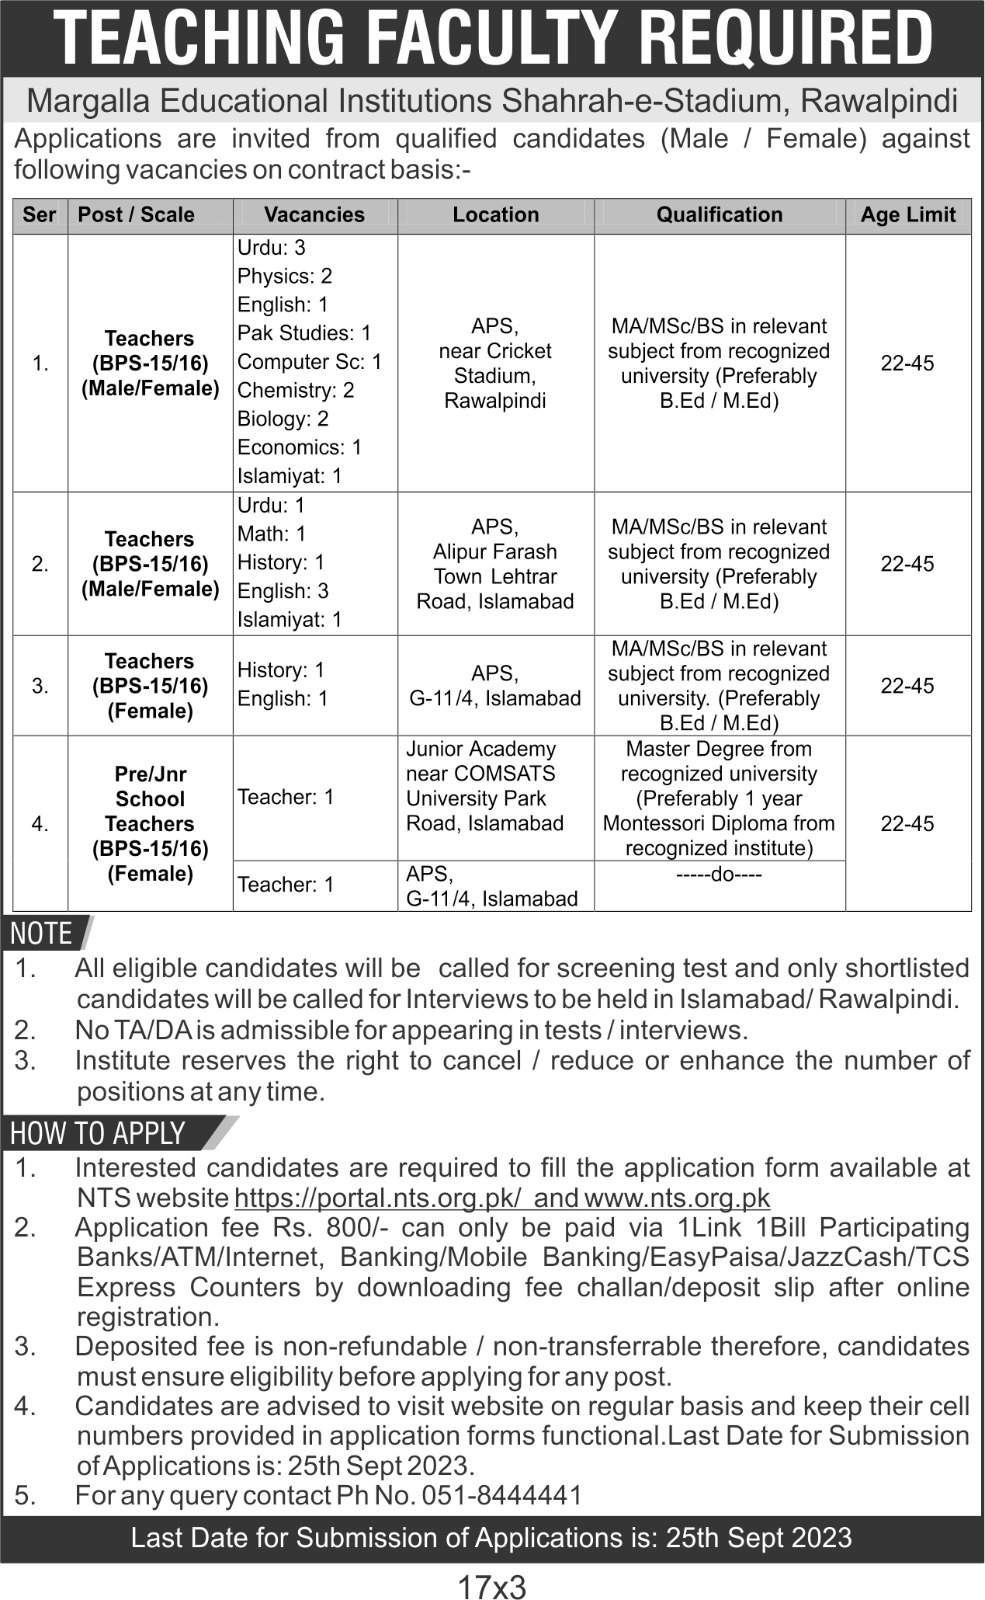 Margalla Educational Institutes Jobs 2023 for Teachers (Males and Females) via NTS